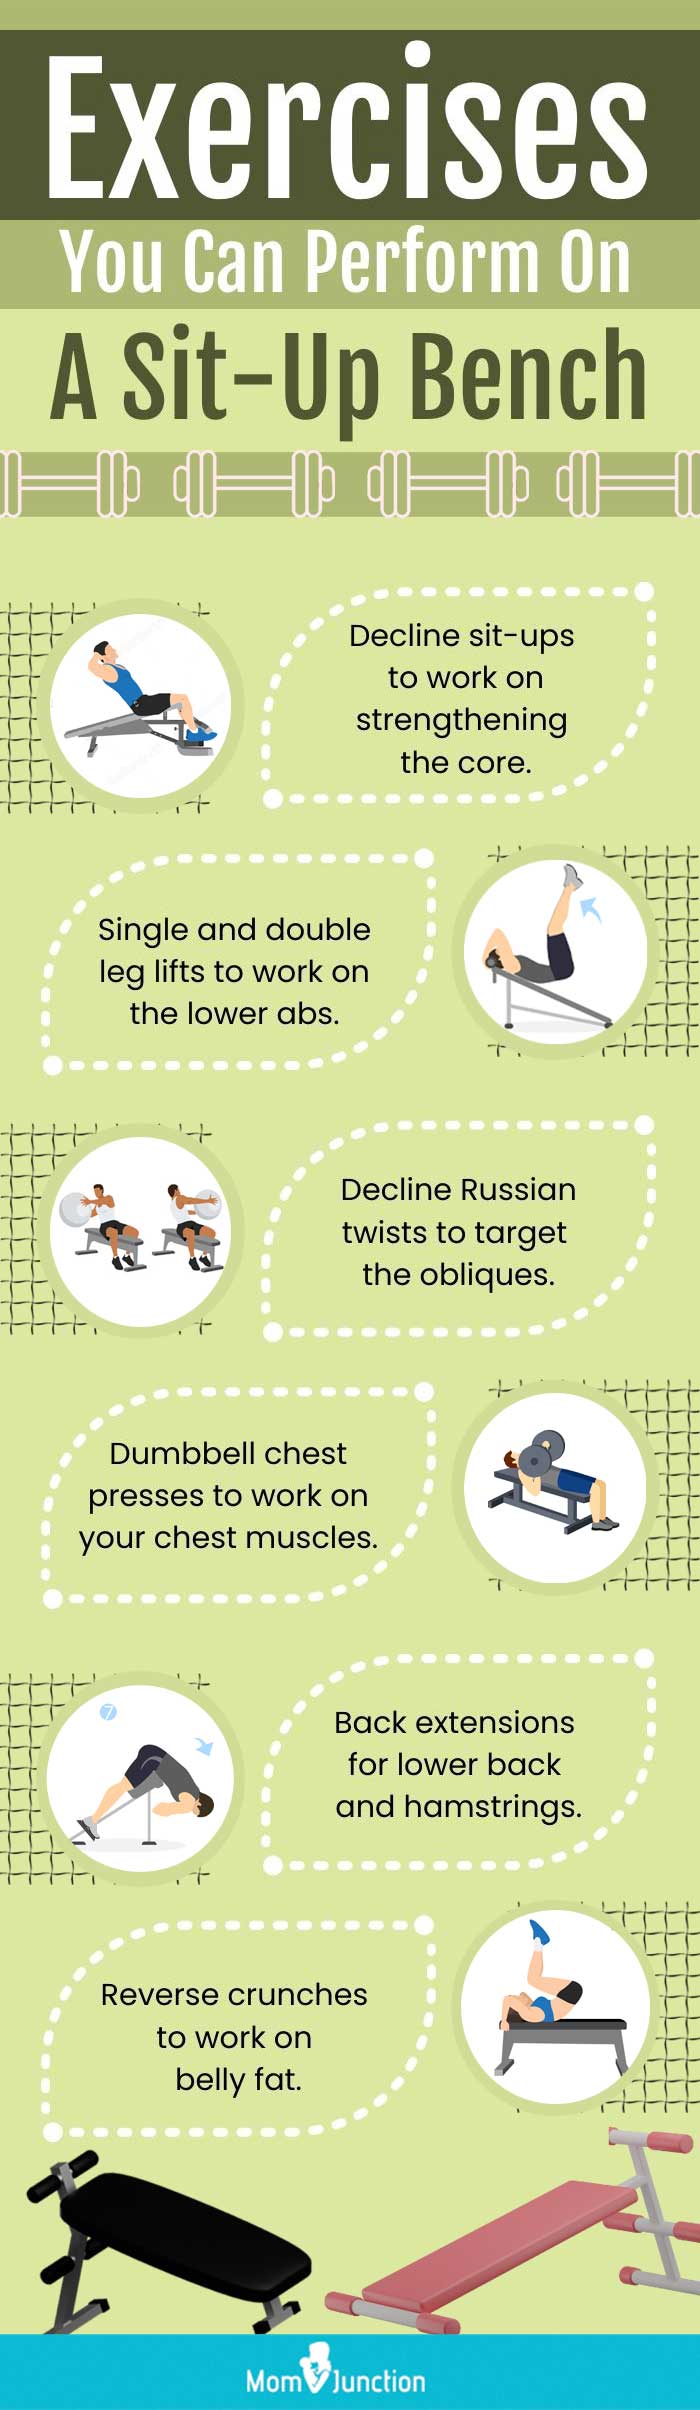 Exercises You Can Perform On A Sit Up Bench (infographic)